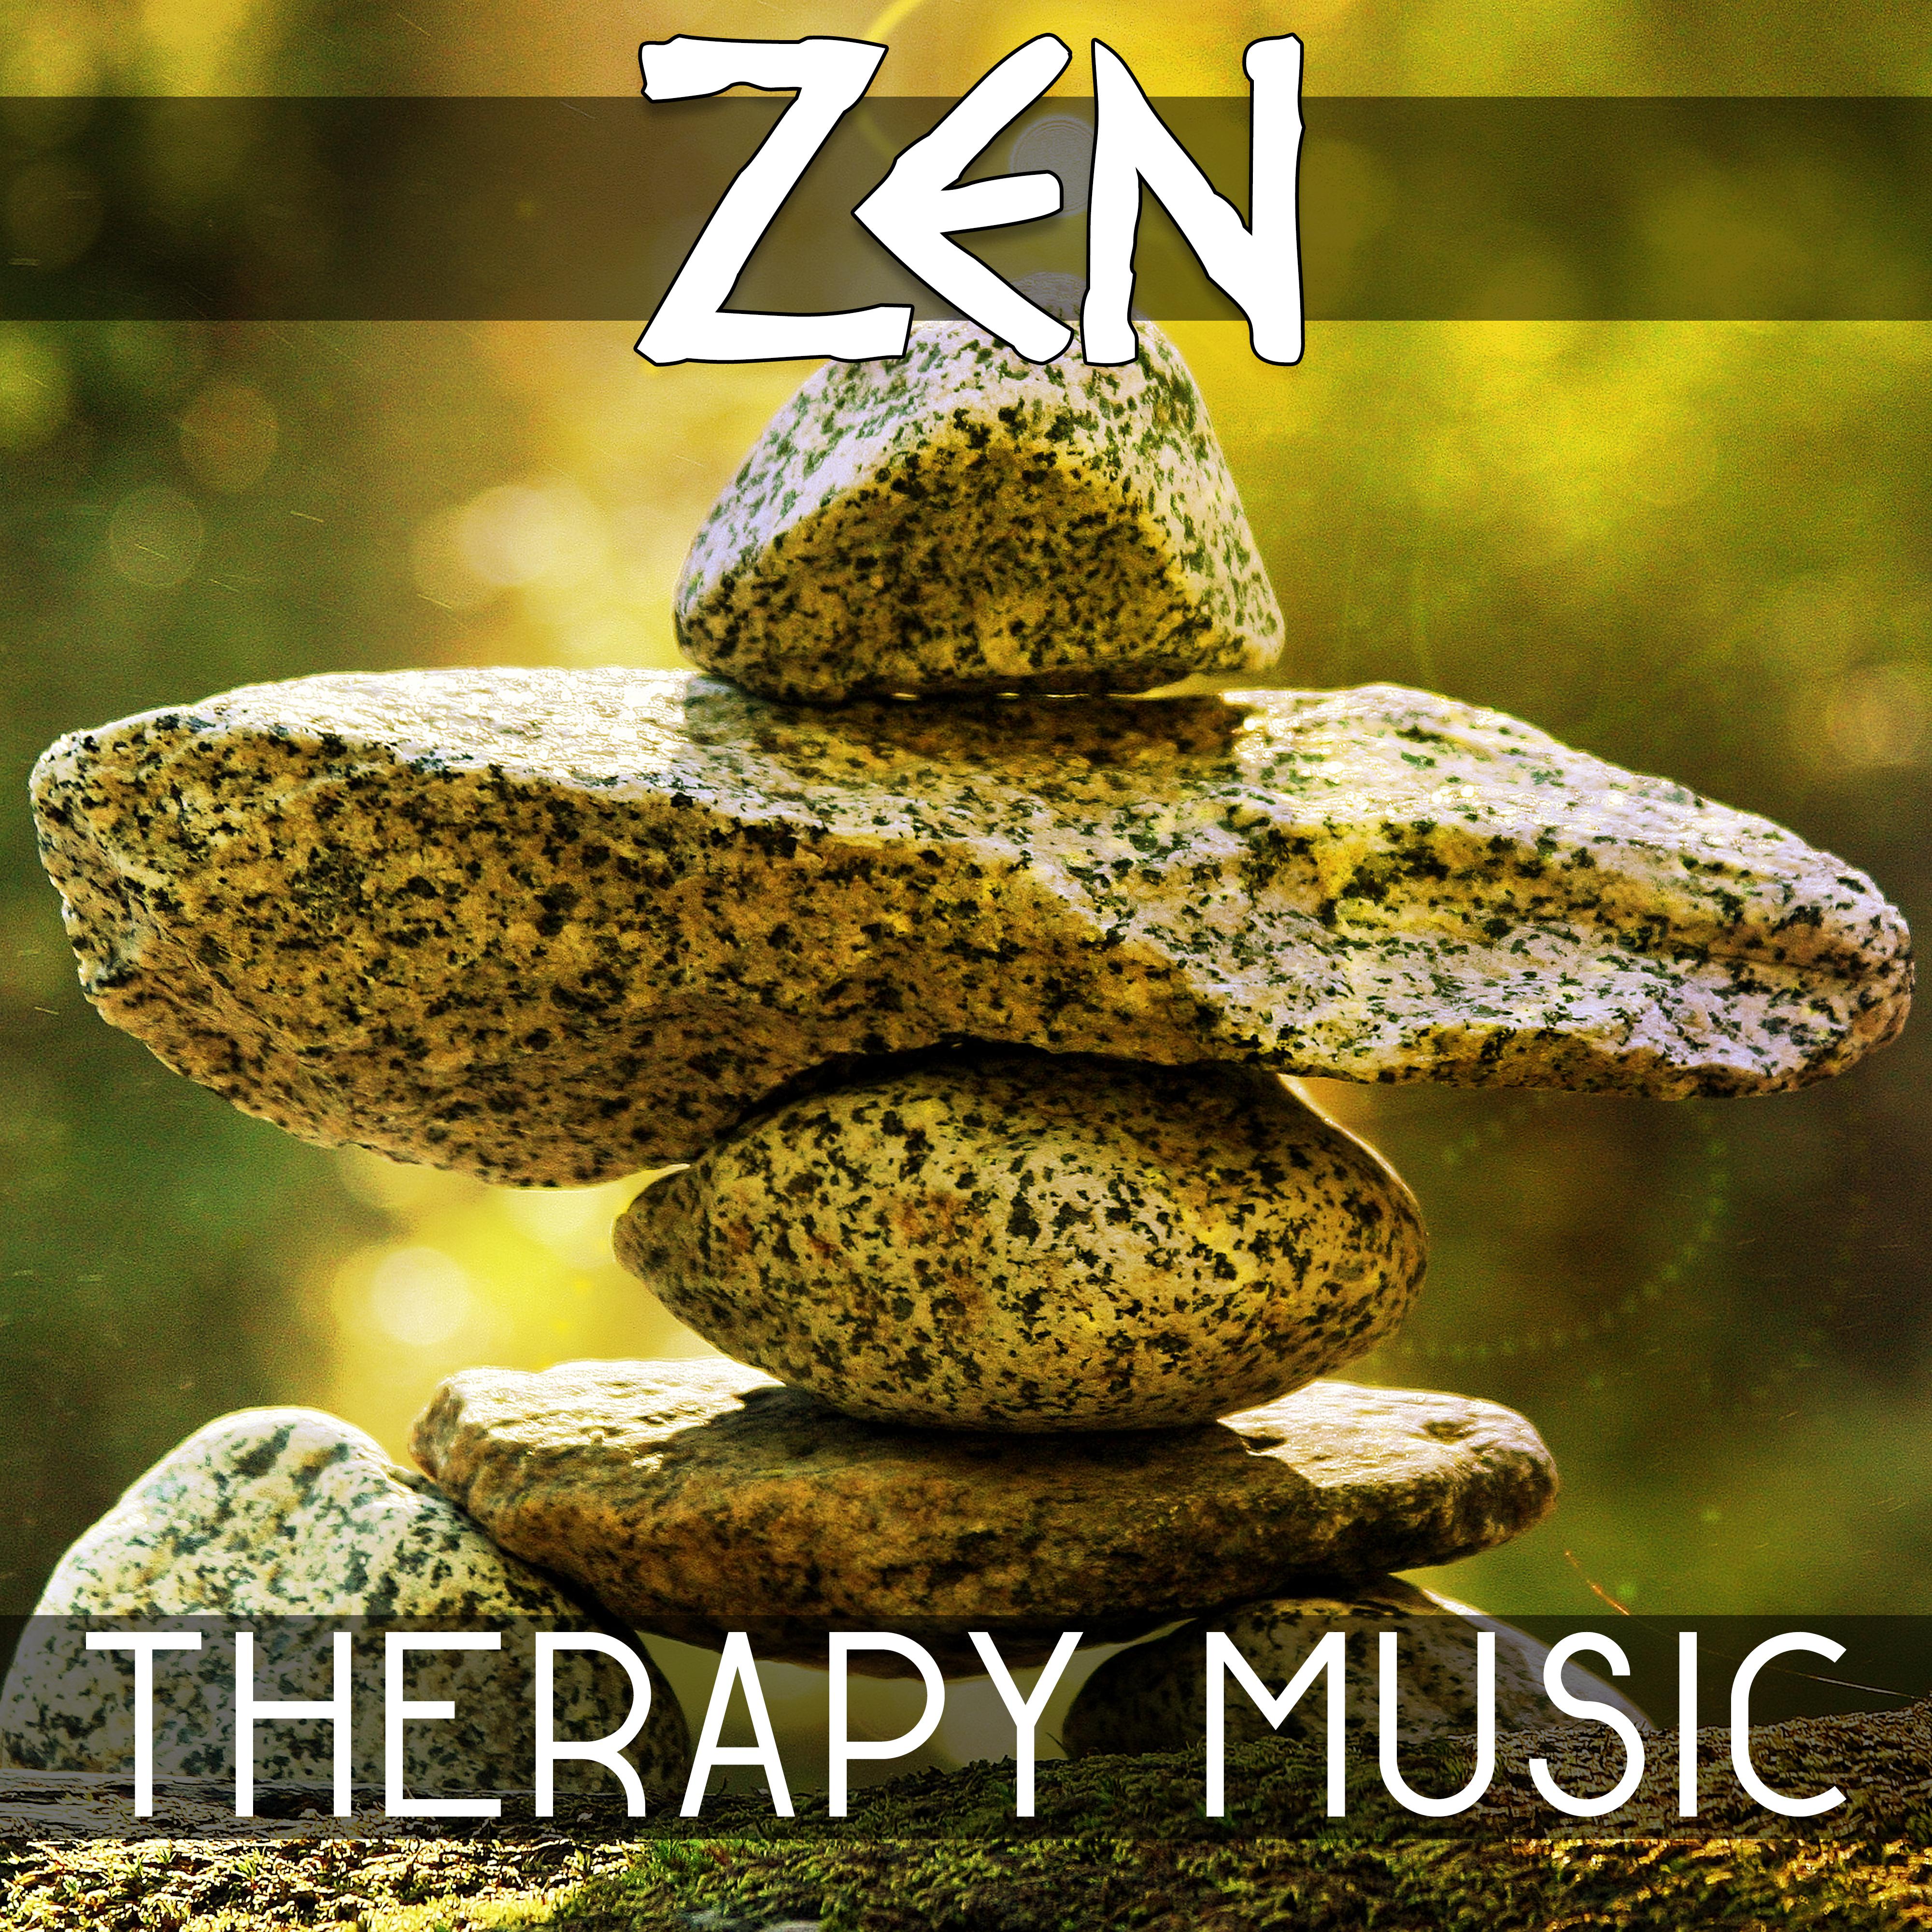 Zen Therapy Music  Peaceful Music for Relax, Meditate, Sleep, Reiki, Natural Sounds